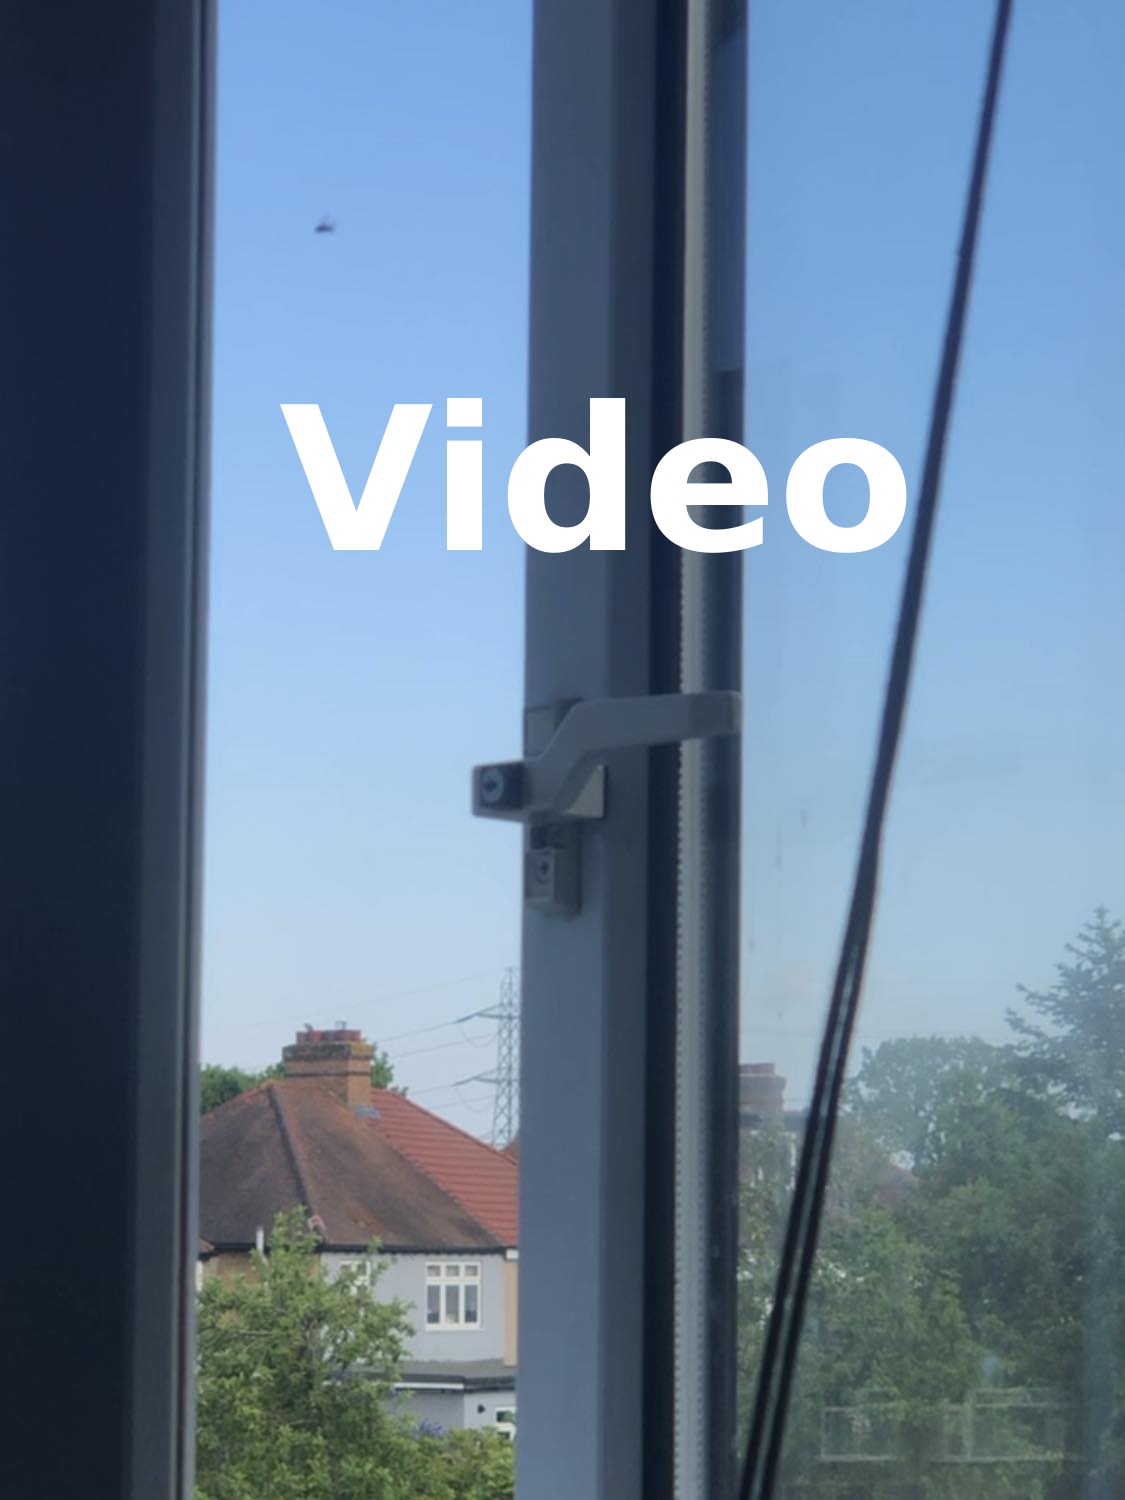 Another link to a video, a housefly seen flying through an open window, with the word video overtop of the image